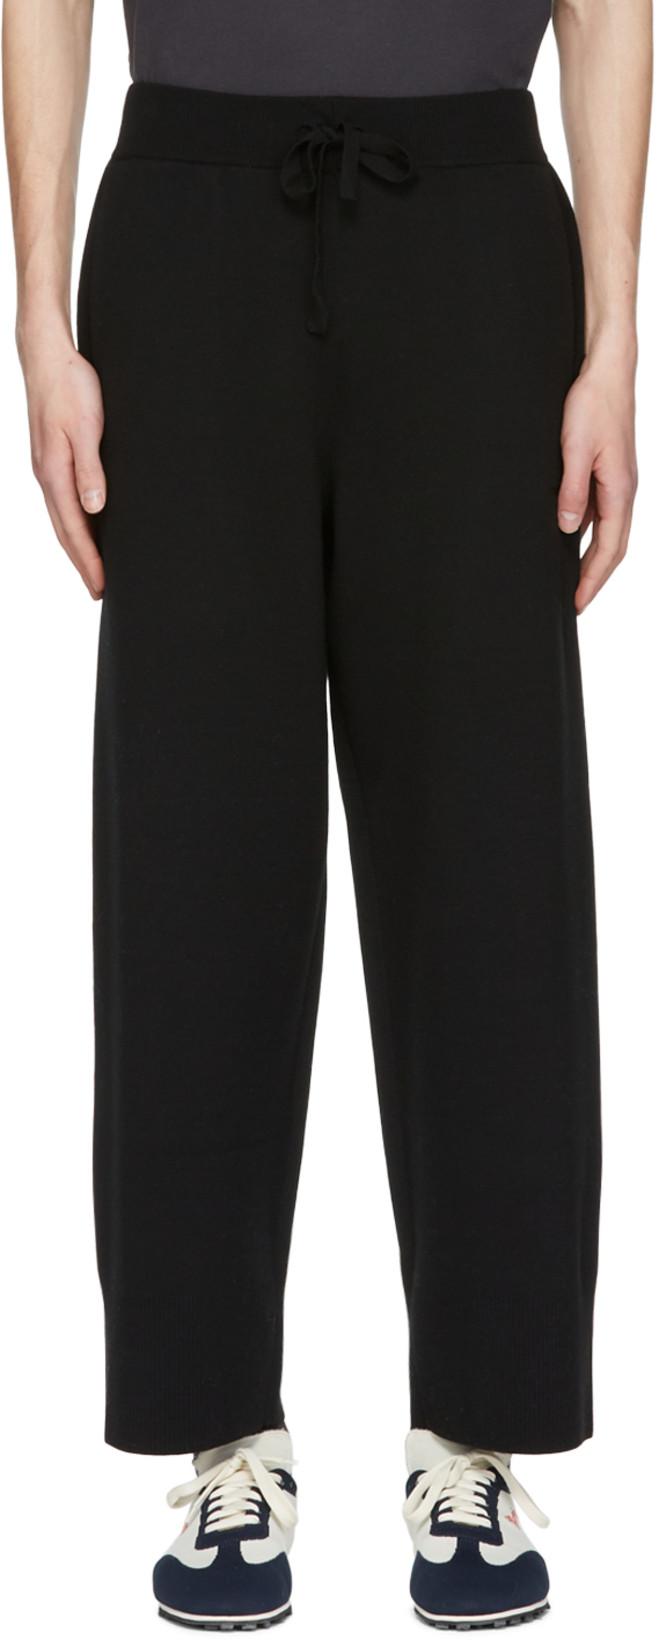 Black Wool Lounge Pants by A PERSONAL NOTE 73